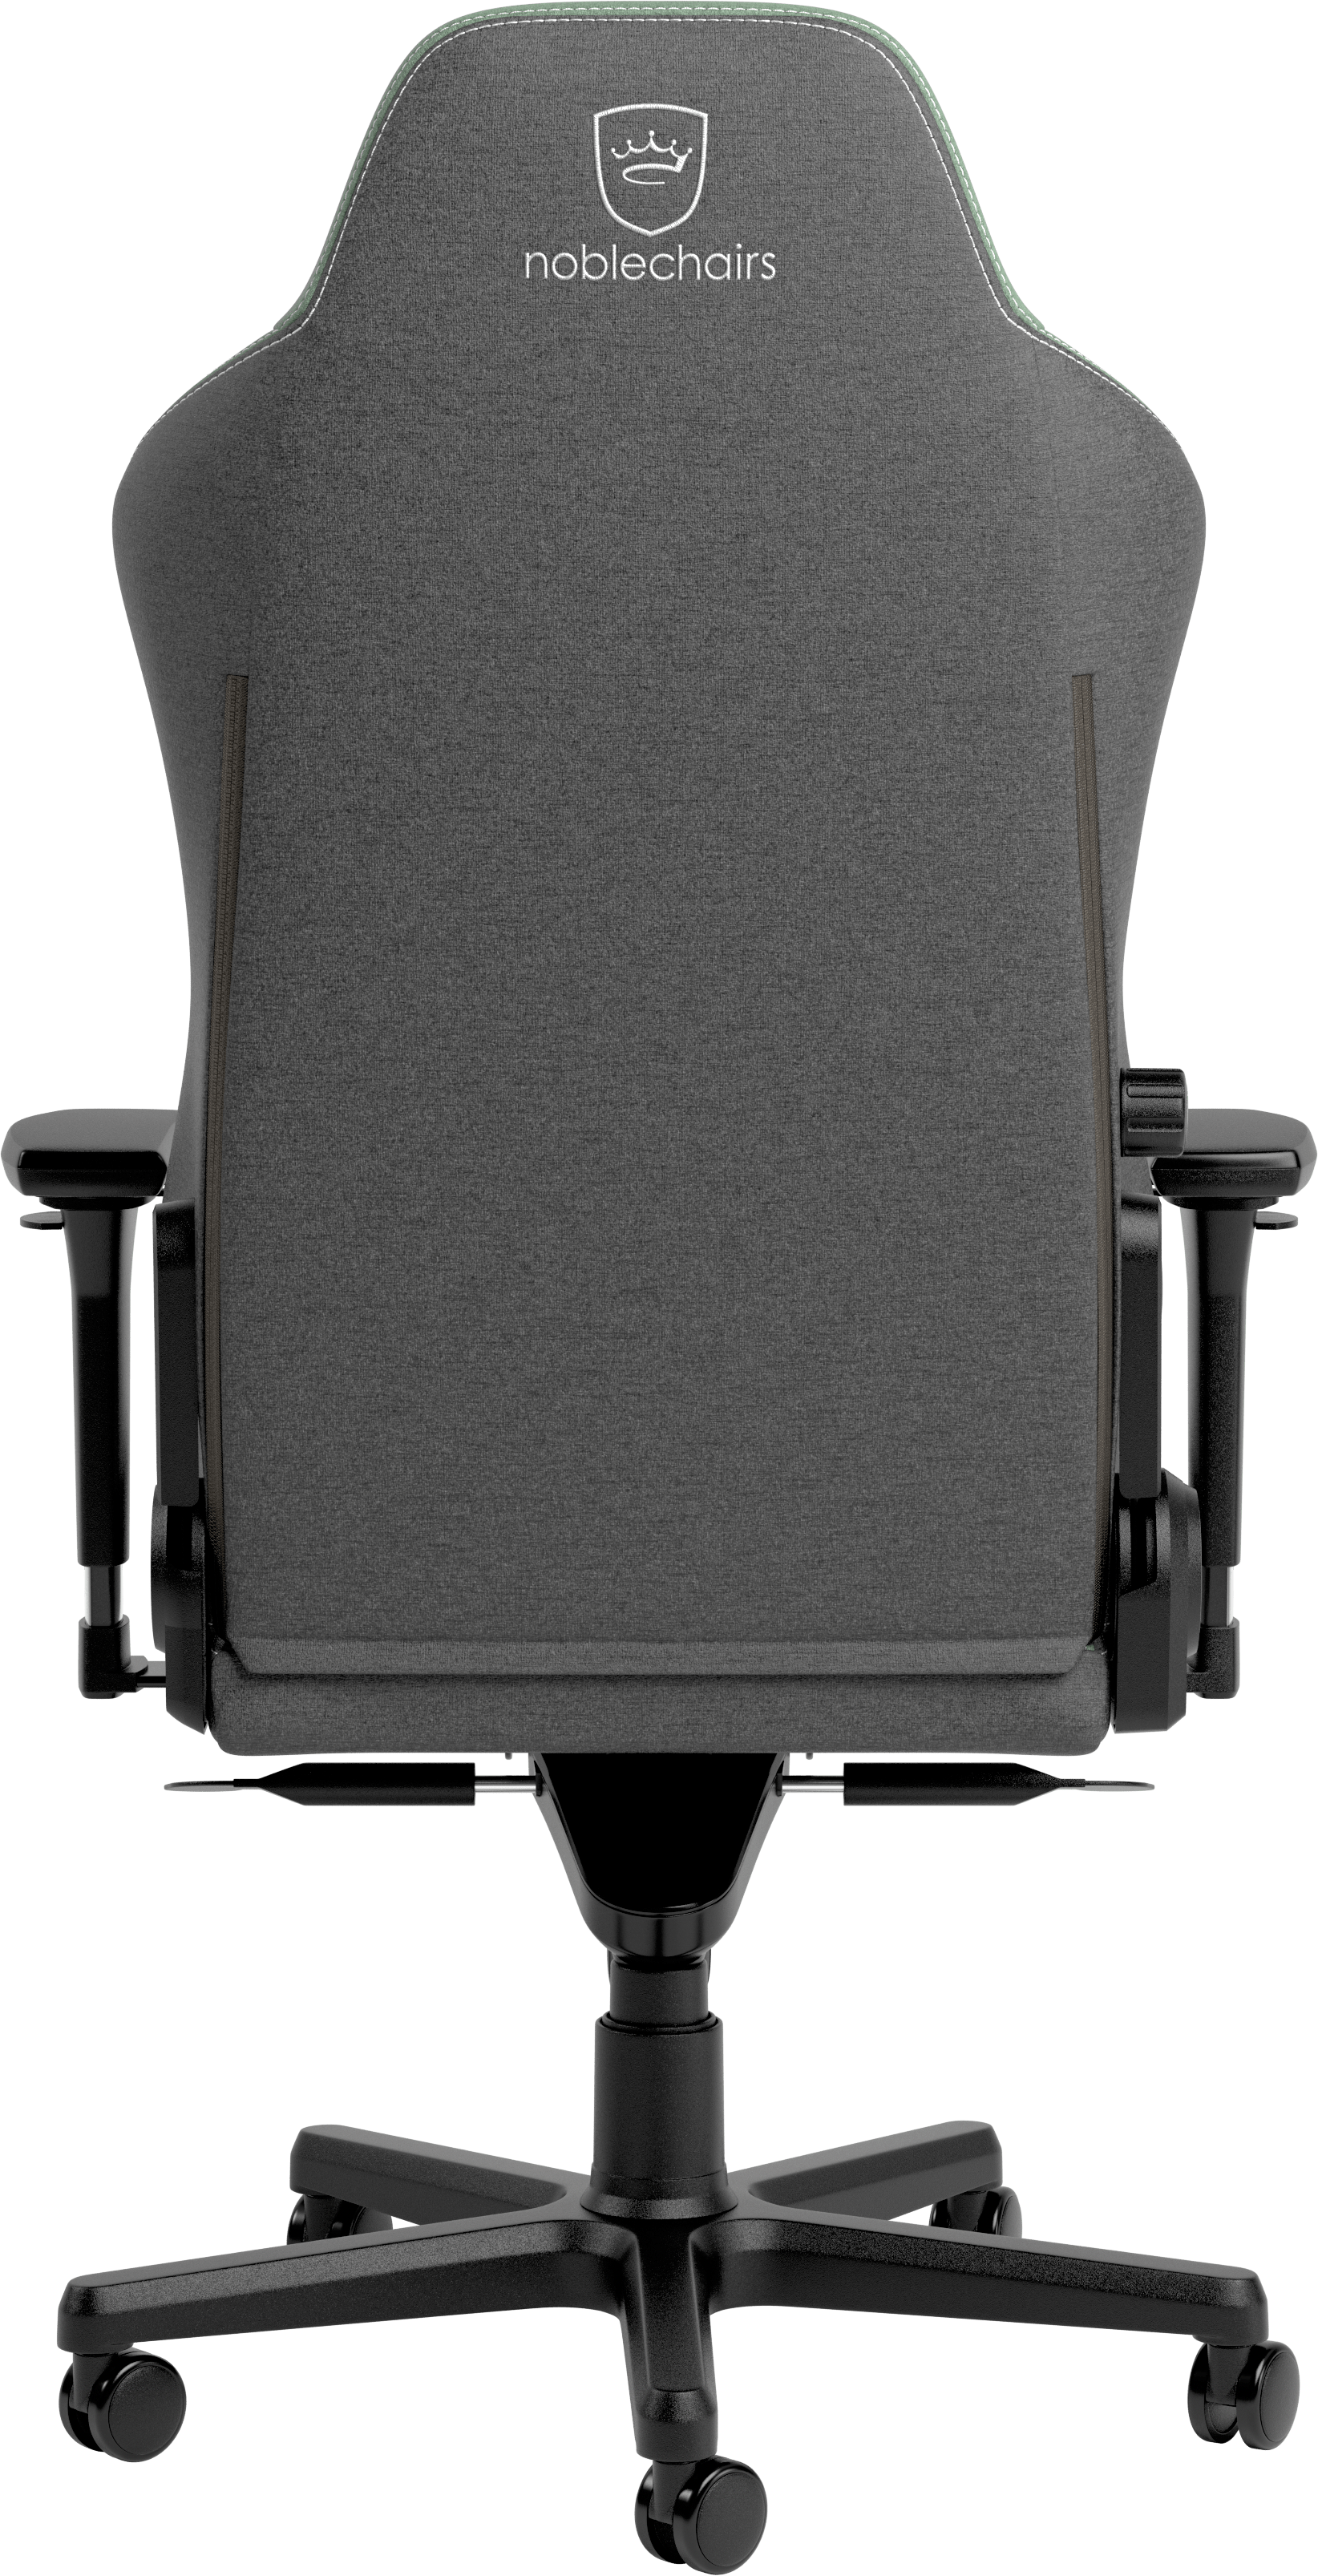 noblechairs HERO TX Two Tone Green Limited Edition stoffen bekleding